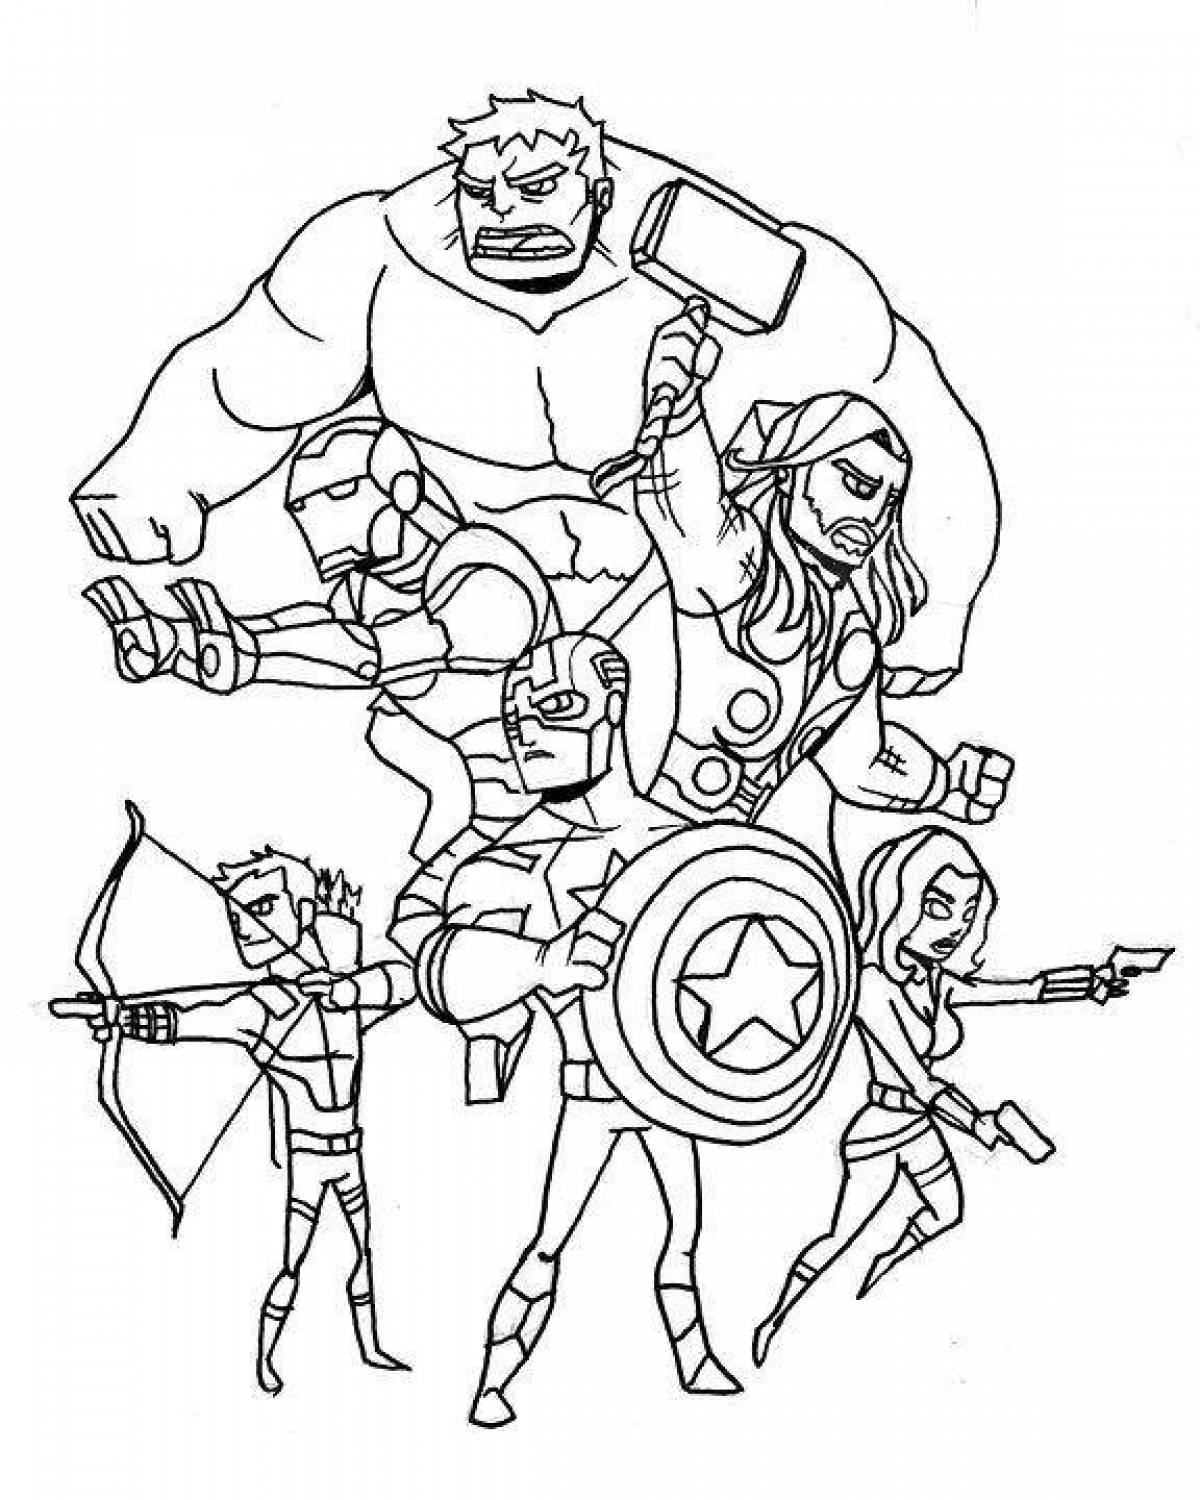 Attractive super heroes whole team coloring book